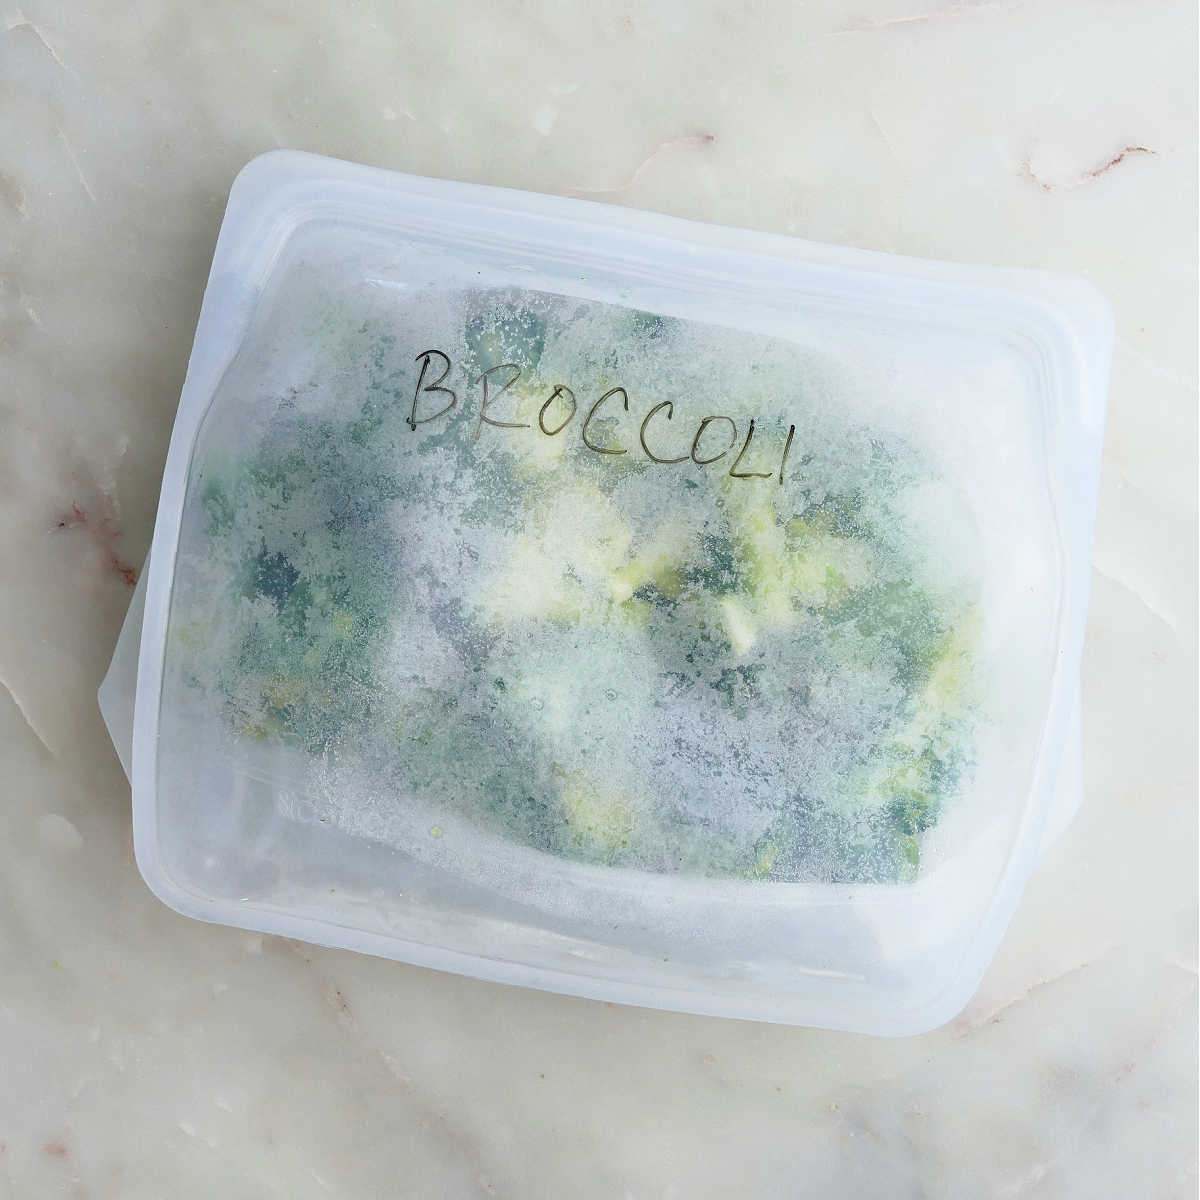 blanched broccoli in a labeled silicone freezer bag on a counter